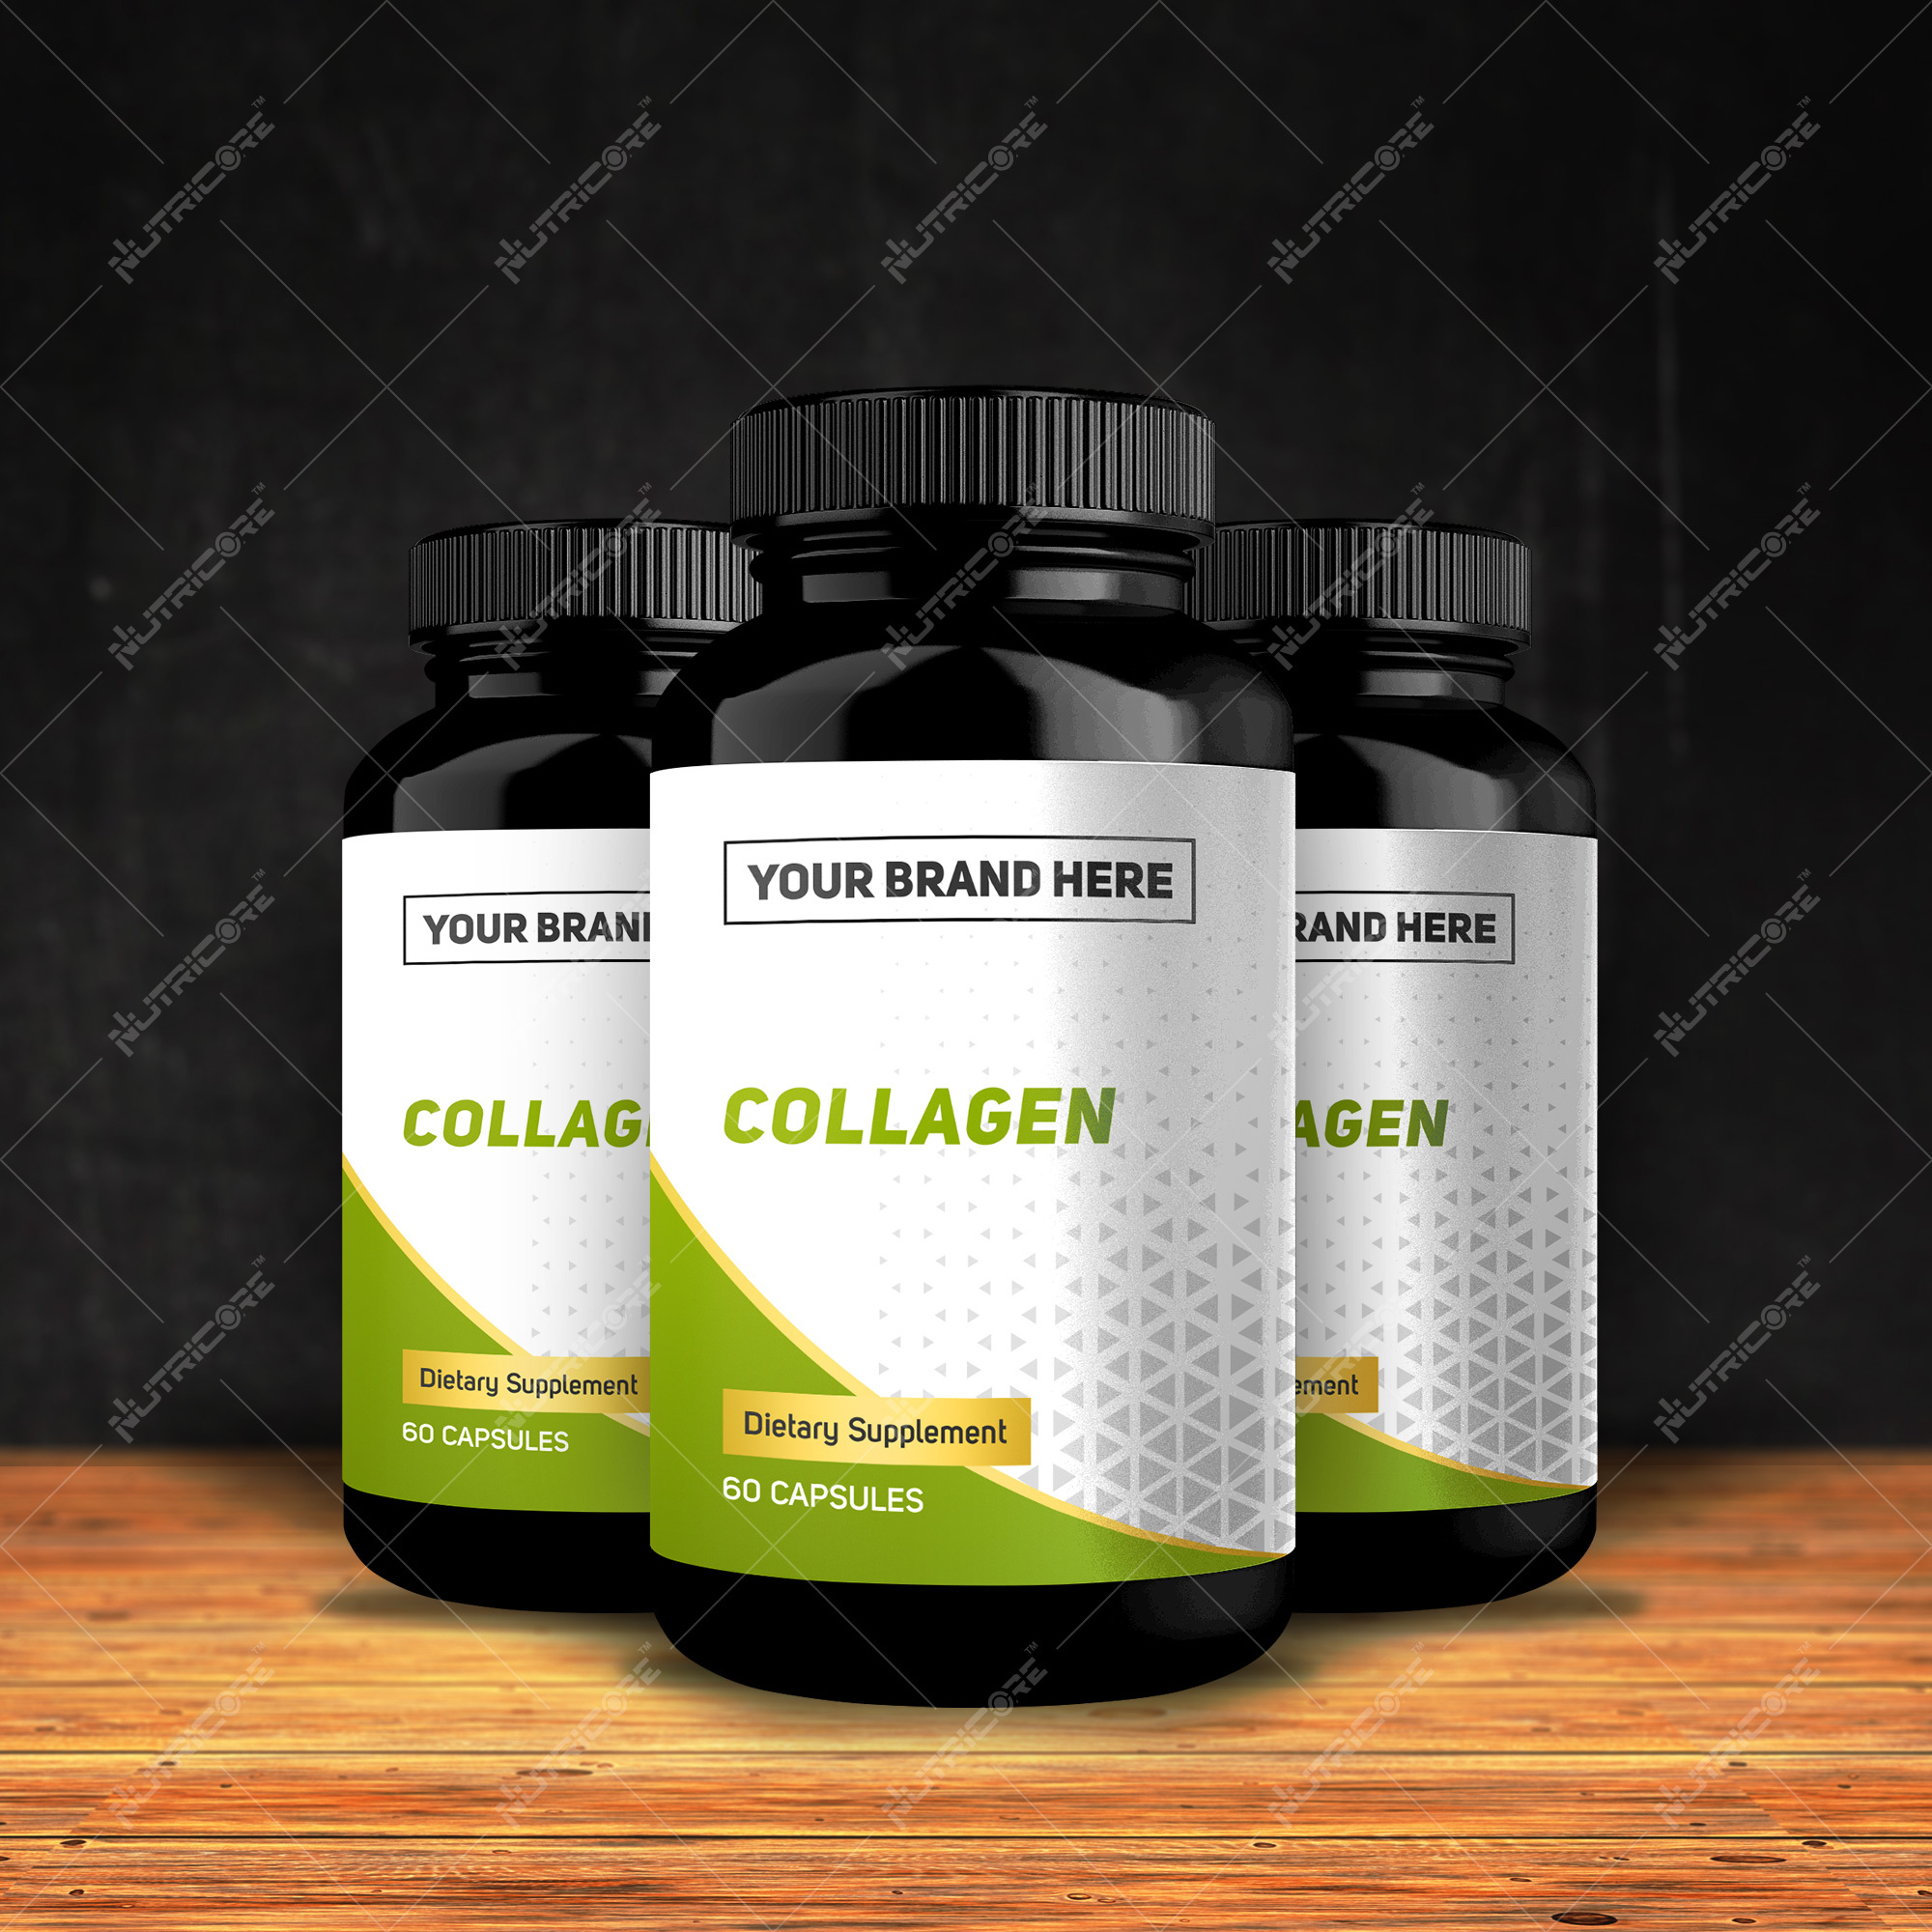 Contract Manufaturing For Collagen Supplement